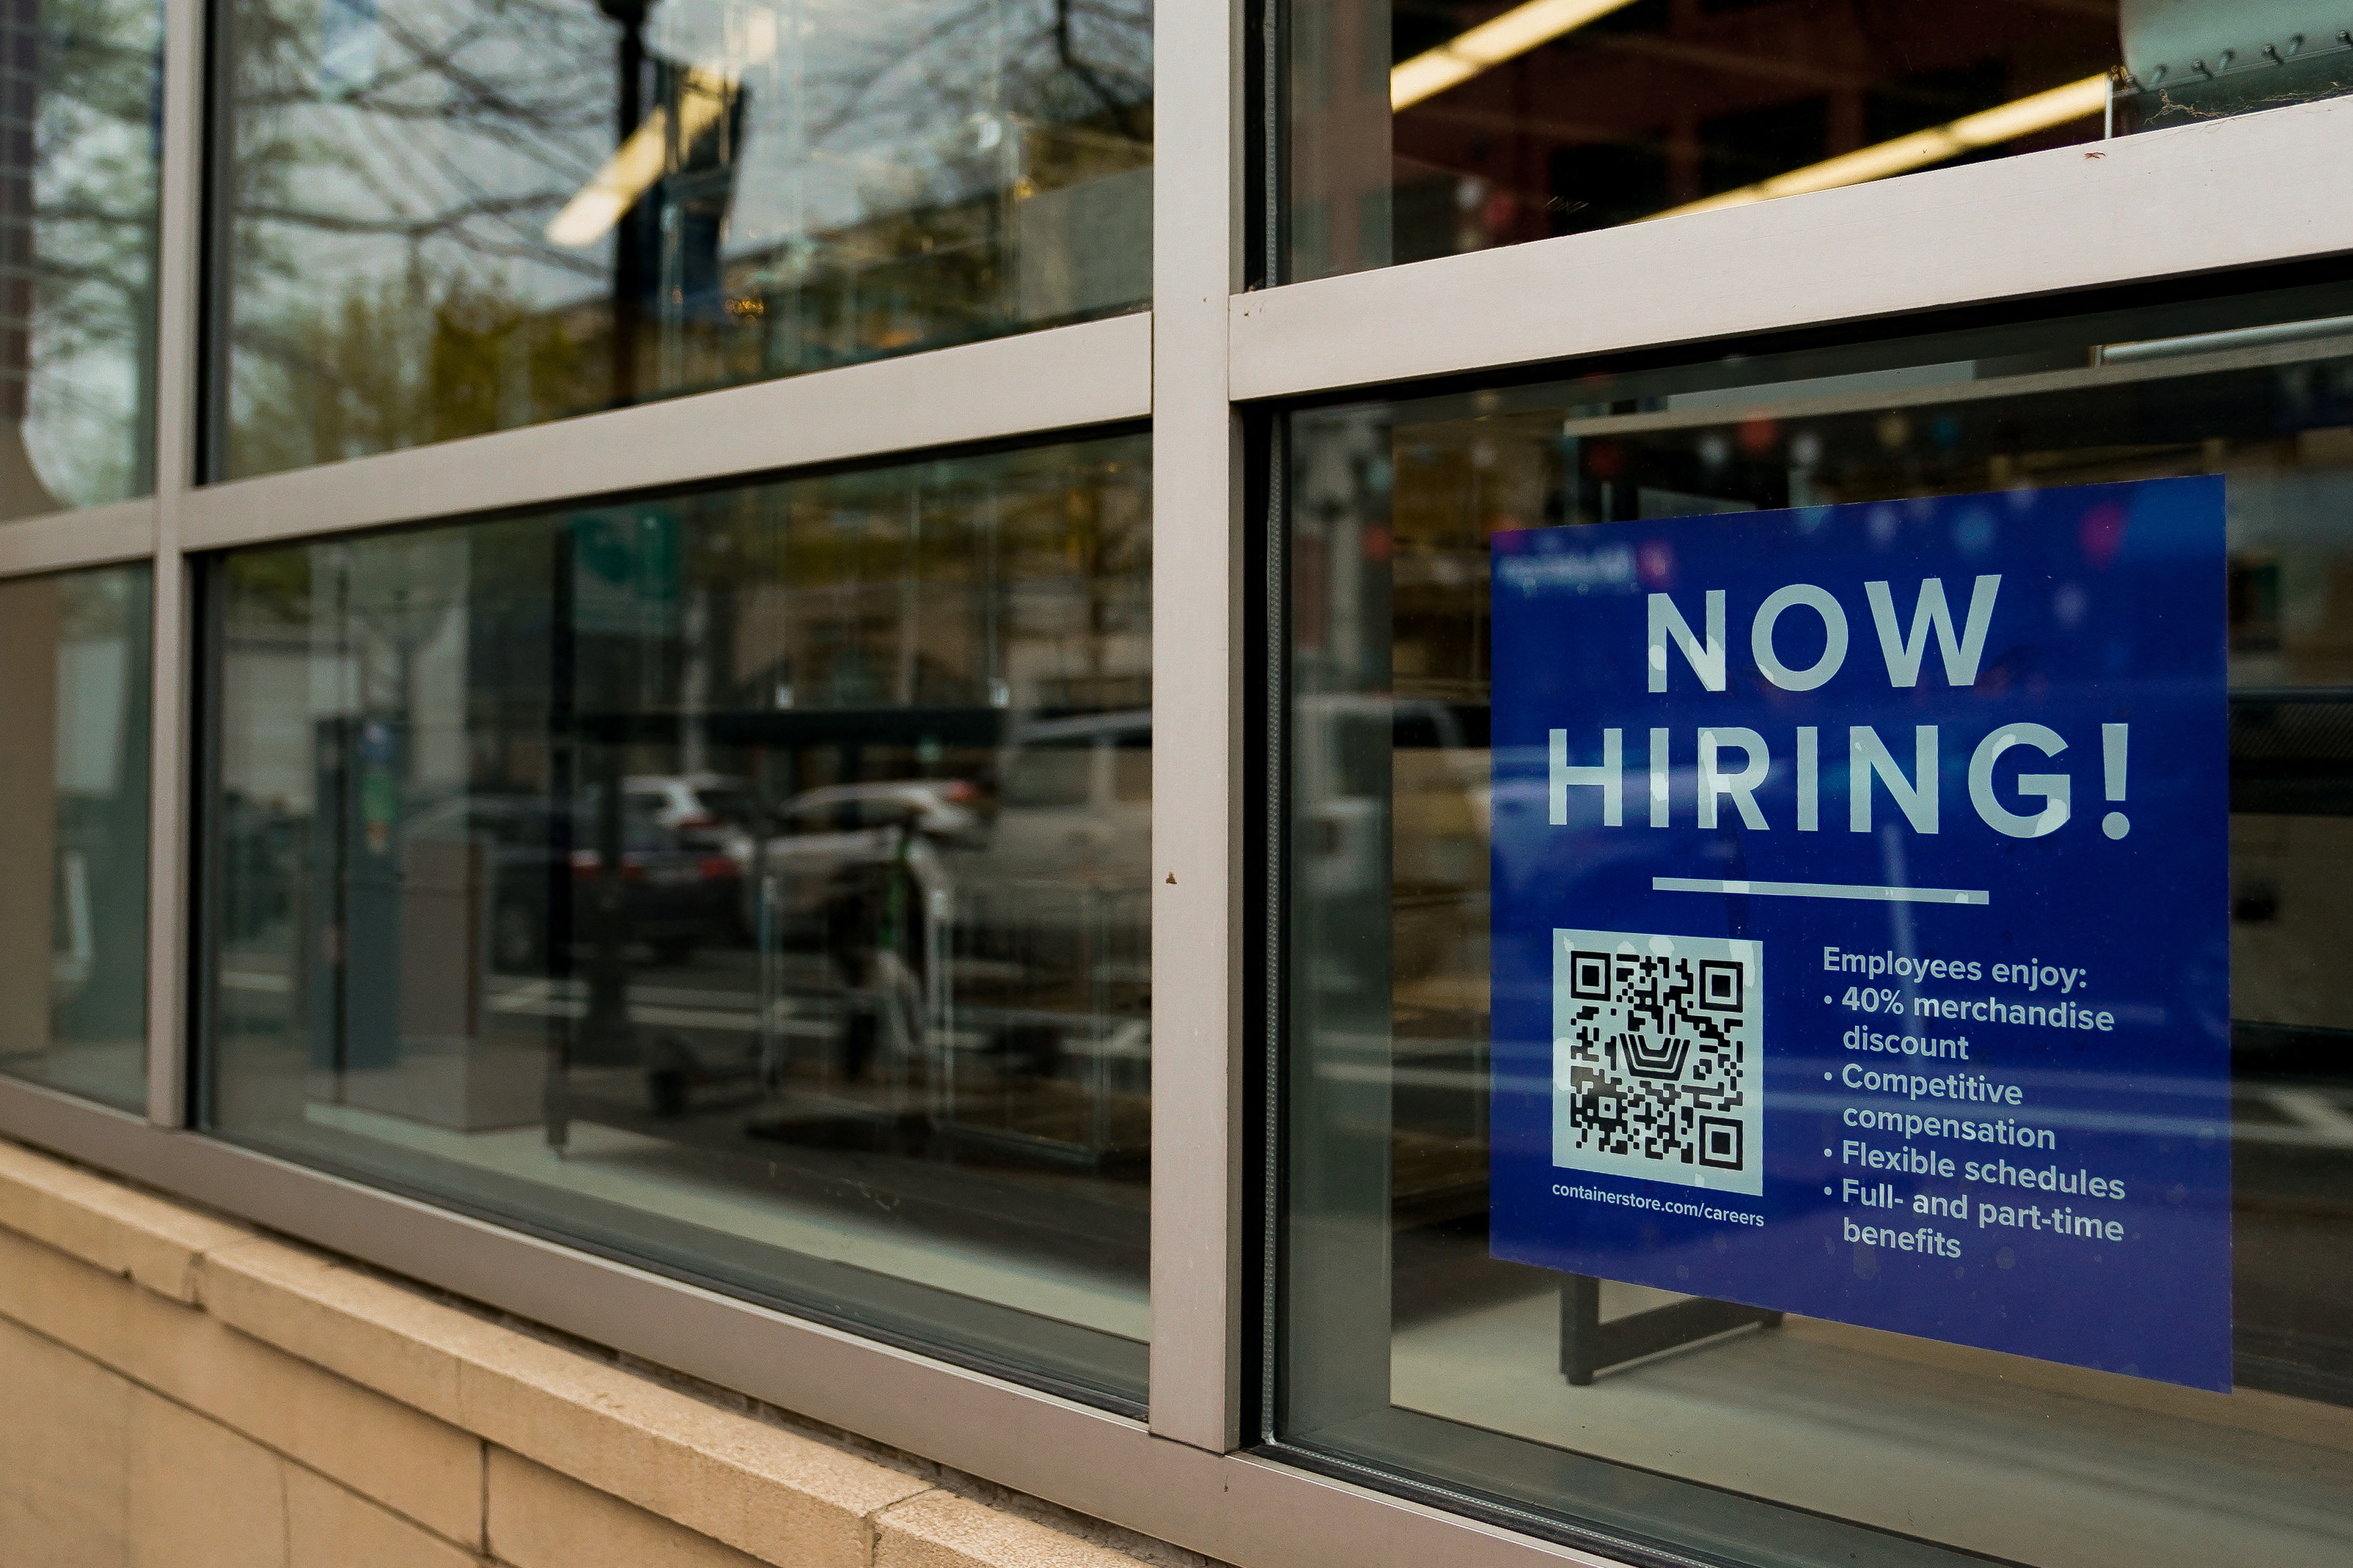 An employee hiring sign with a QR code is seen in a window of a business in Arlington